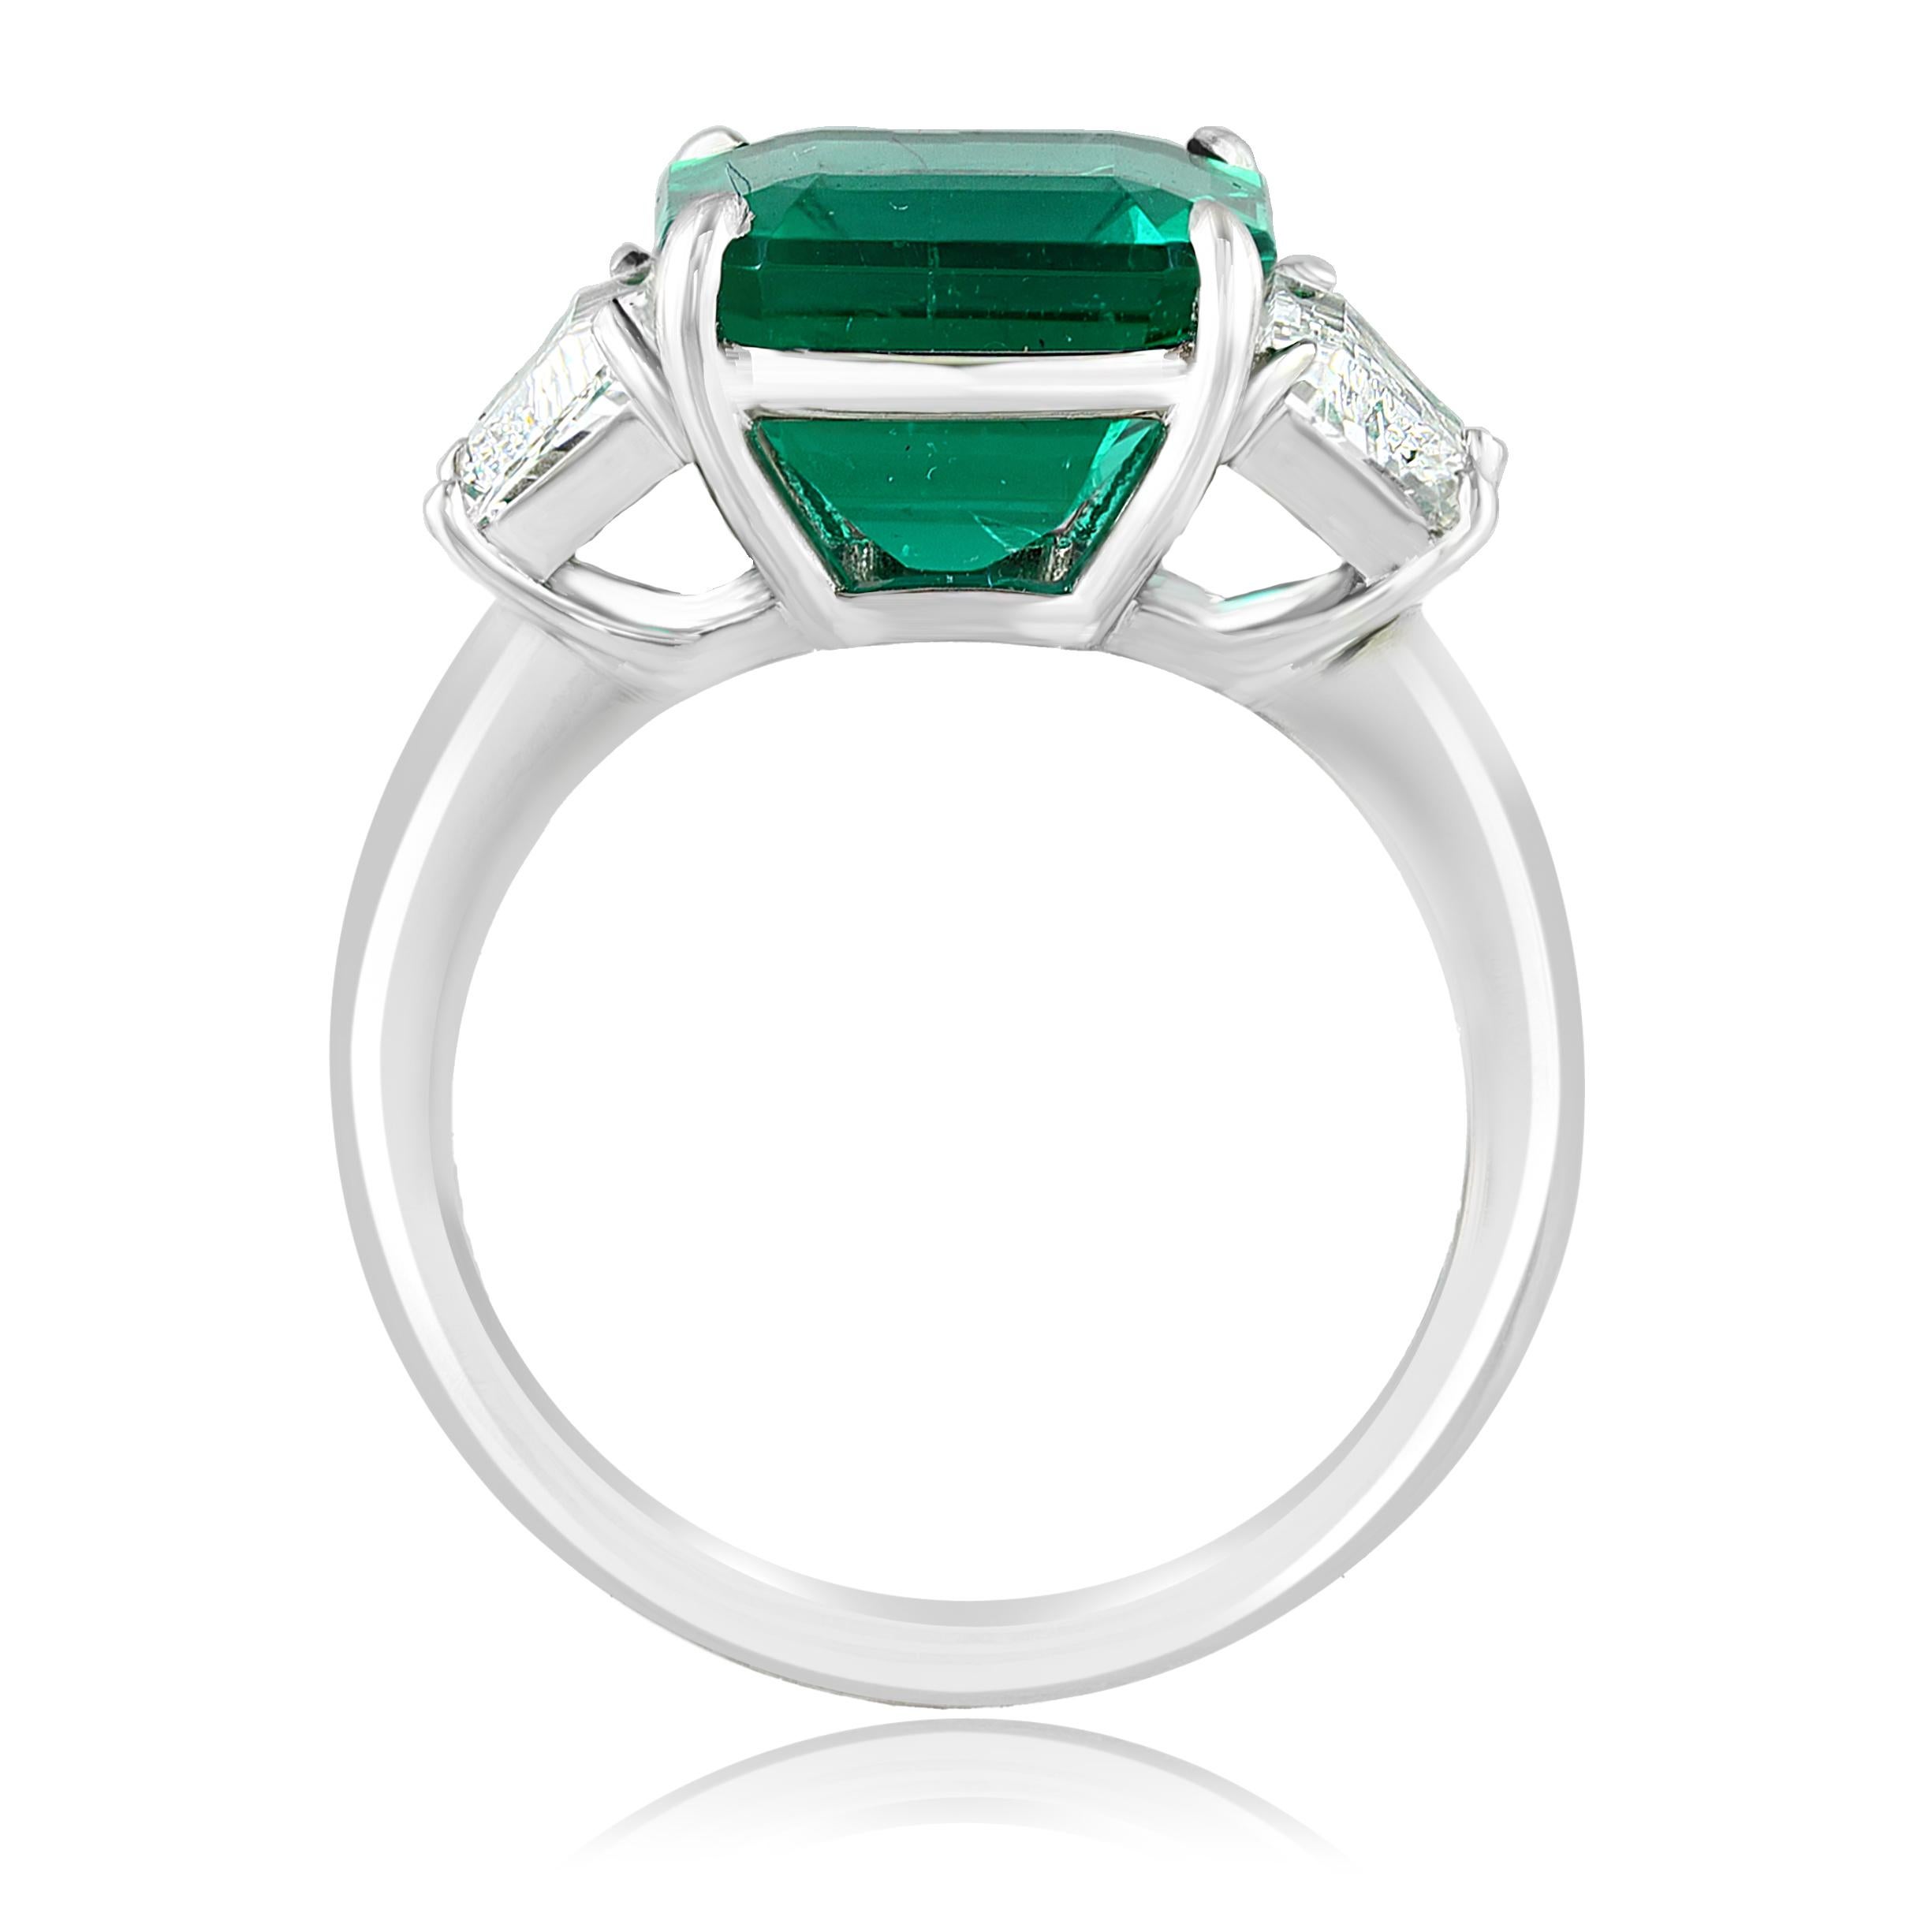 Showcasing Certified Emerald cut, Vibrant color Emerald weighing 4.26 carats, flanked by two brilliant step cut trapezoids diamonds weighing 1.09 carats total. Elegantly set in a polished platinum setting.